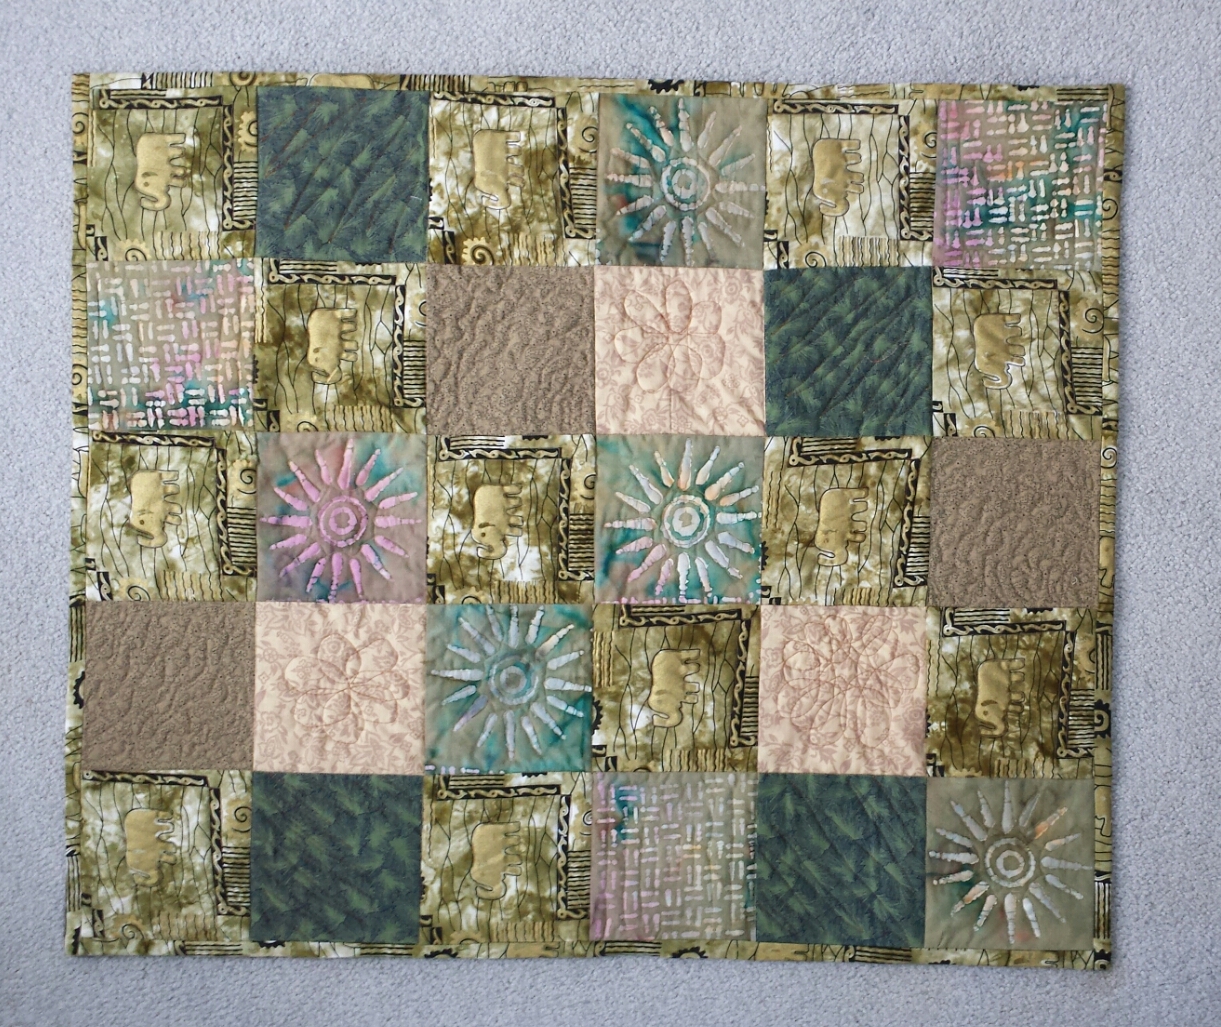 Show 'n Tell - Baby Quilt